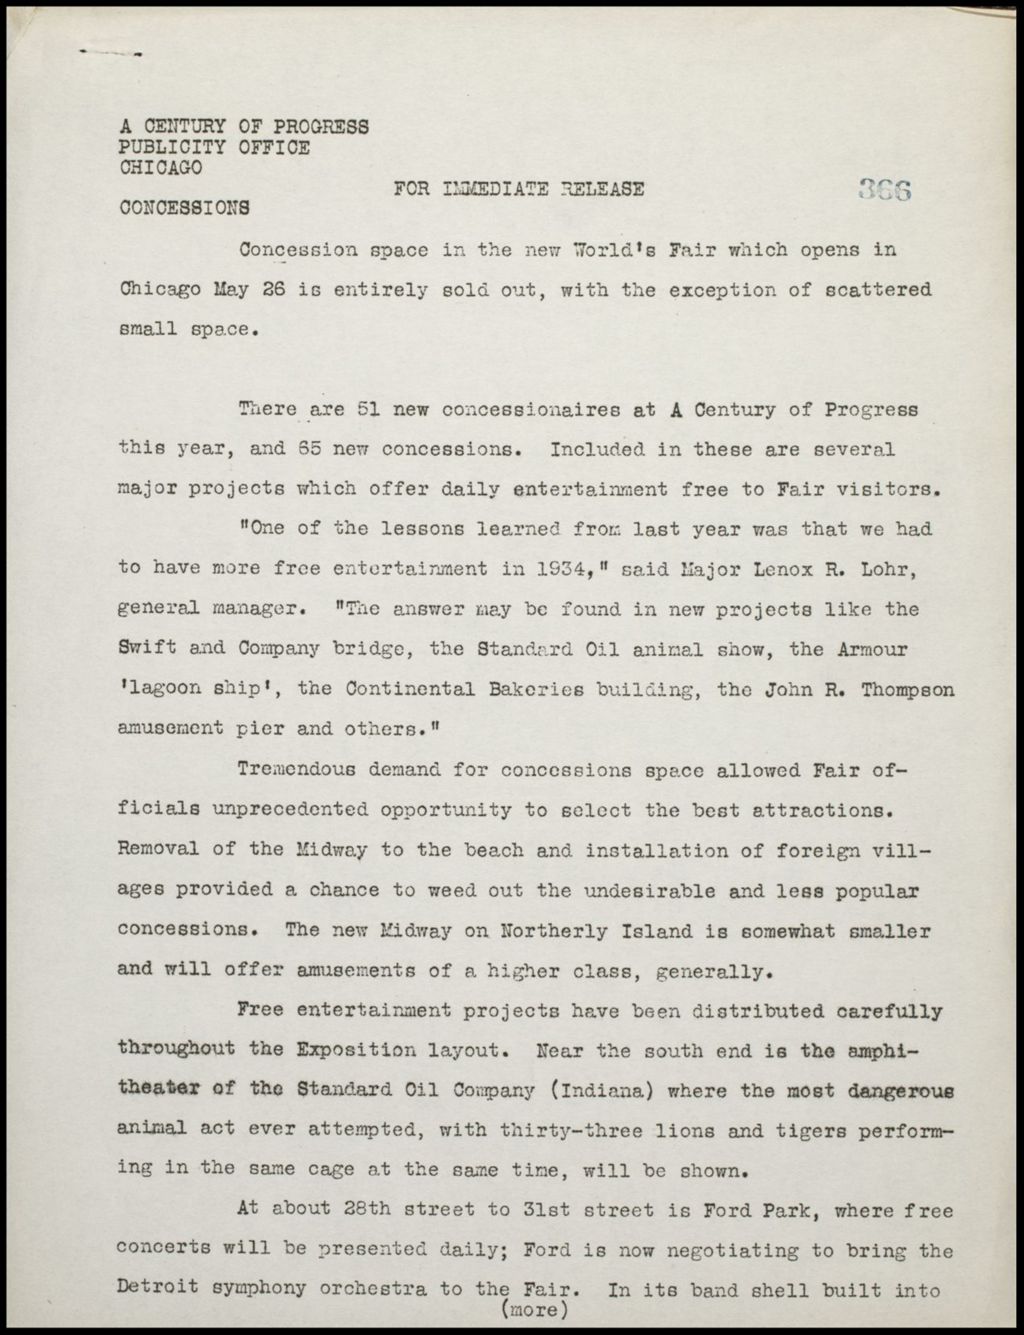 Miniature of Concessions - General Remarks, 1934 (Folder 14-171)